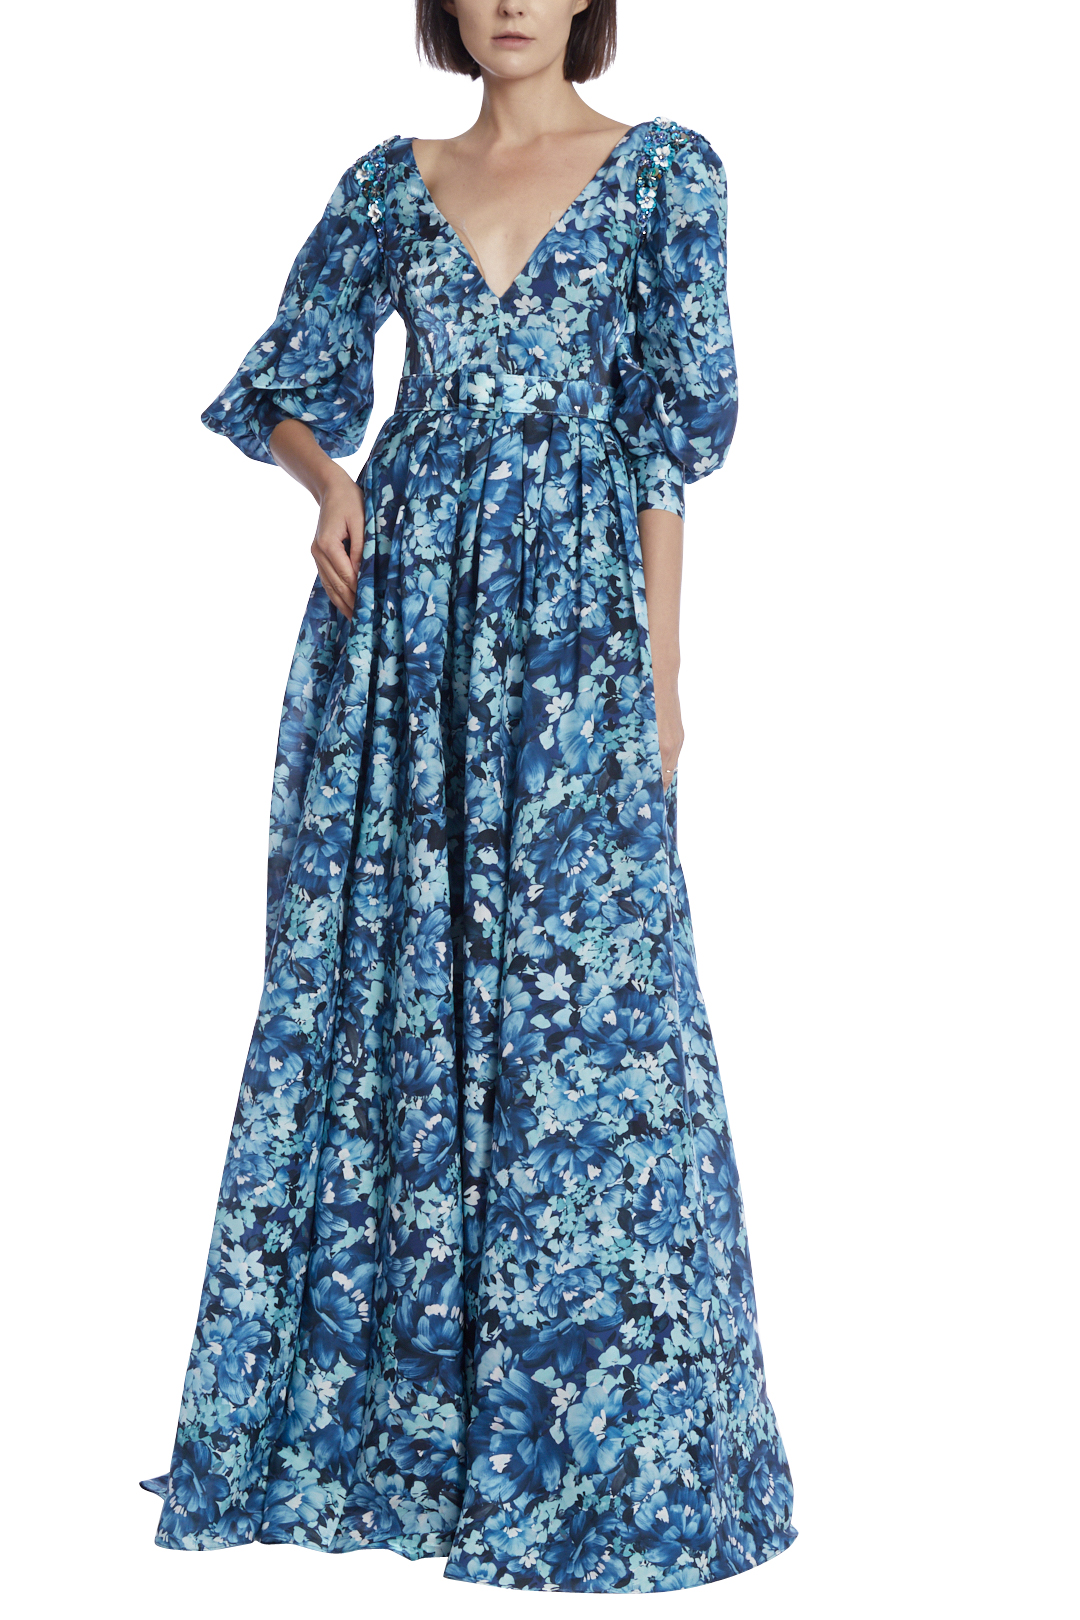 Sequin Print Evening Dresses for Women with Sleeves - Ever-Pretty US